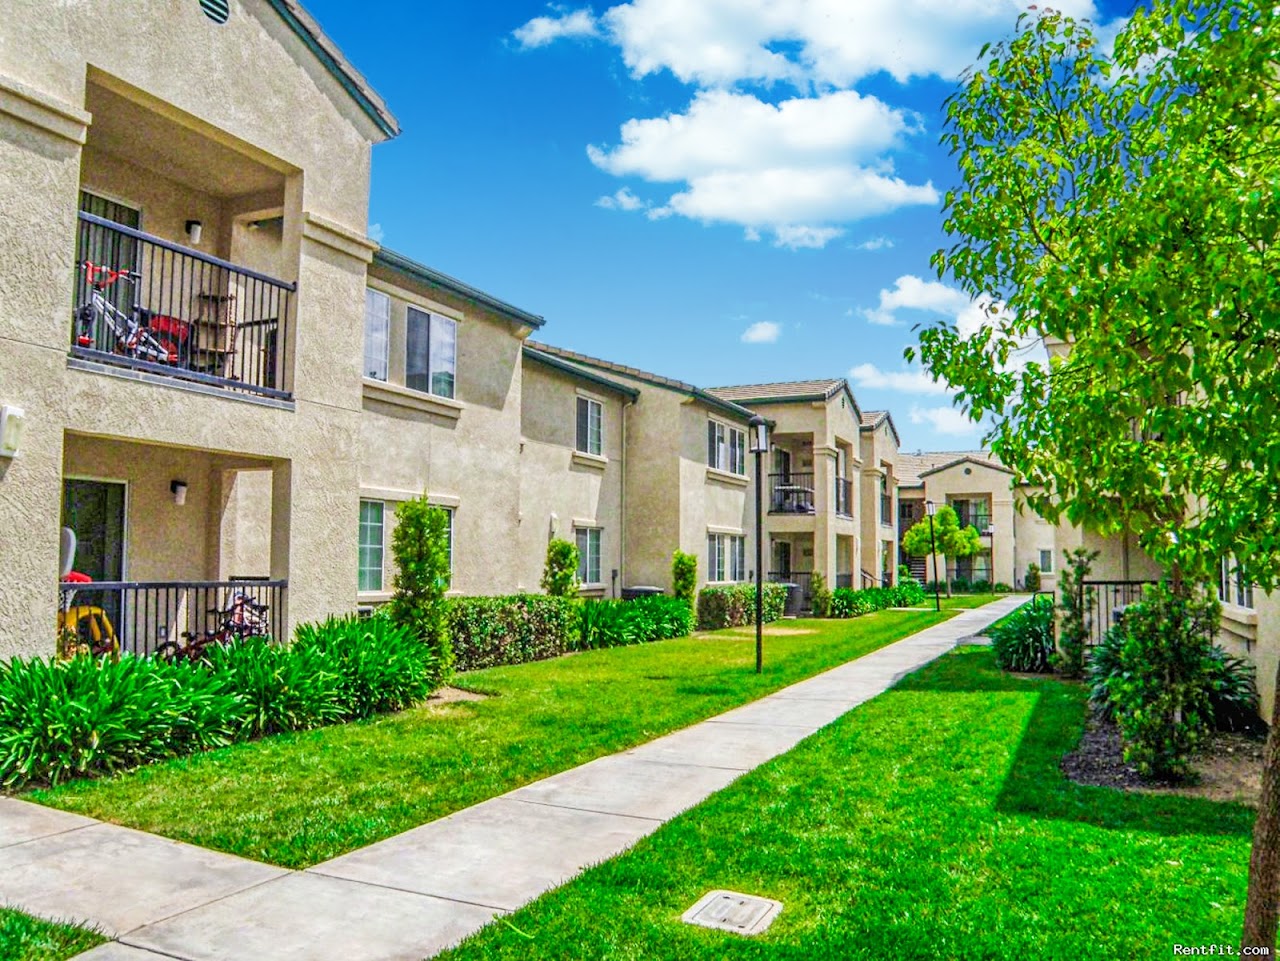 Photo of WILLOWS (CLOVIS). Affordable housing located at 865 W GETTYSBURG AVE CLOVIS, CA 93612